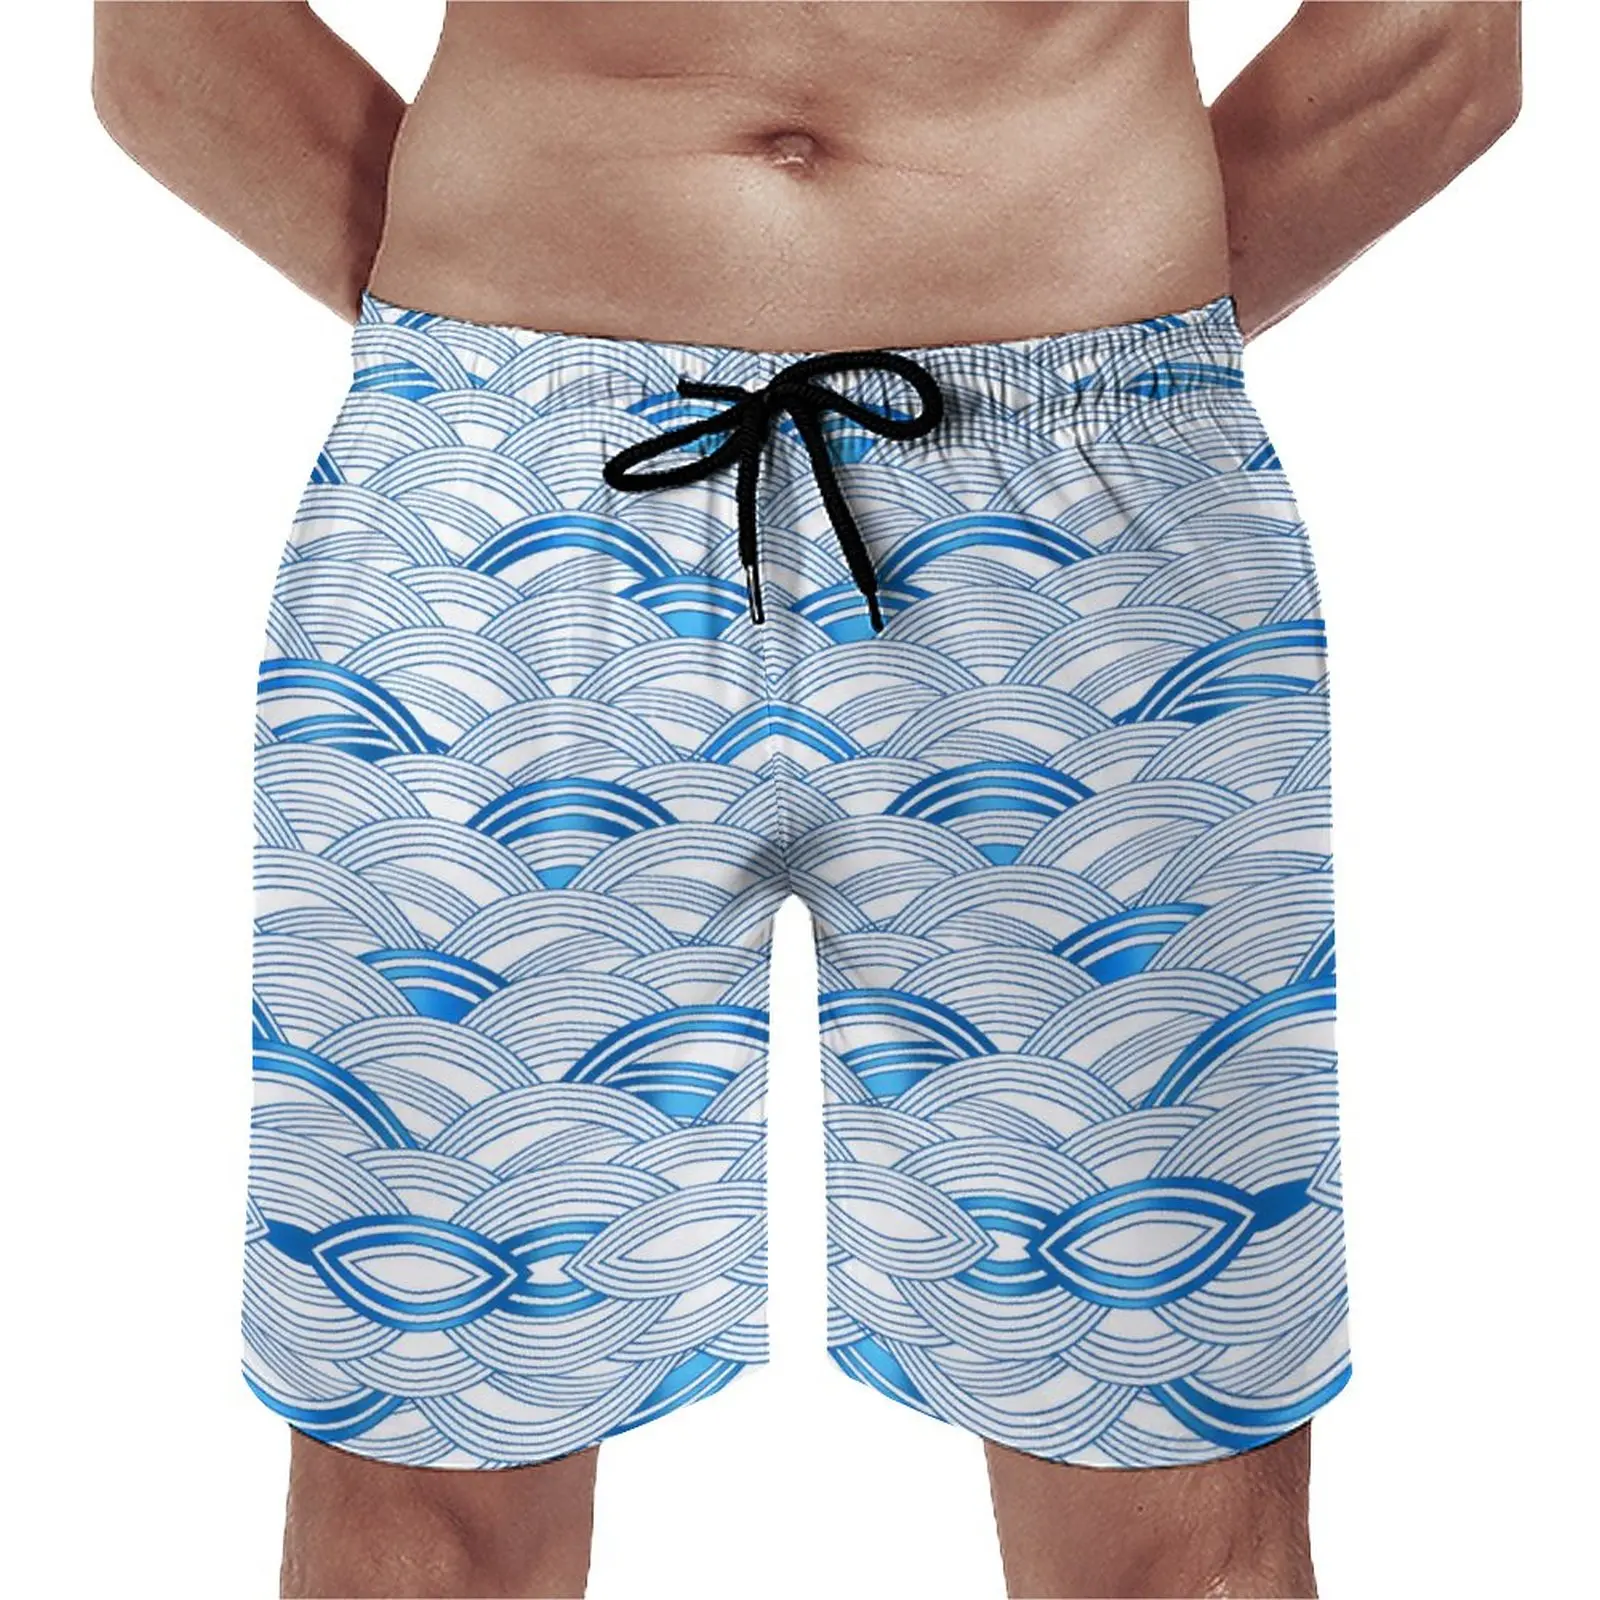 

Board Shorts Ocean Waves Funny Swimming Trunks Abstract Print Men's Quick Drying Sports Surf Quality Oversize Board Short Pants